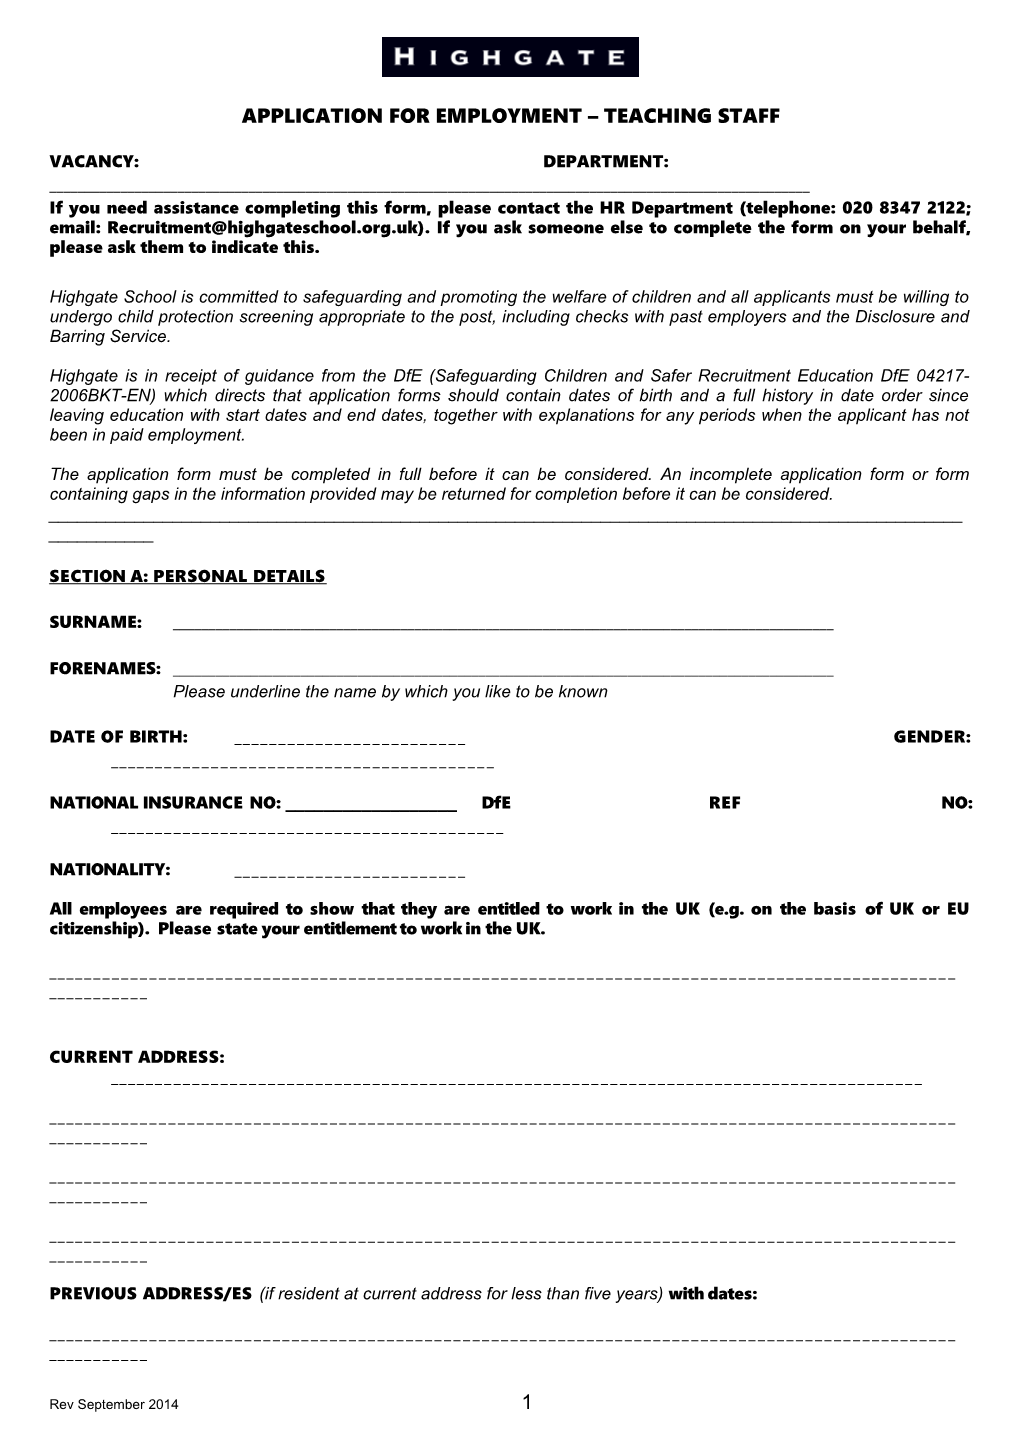 Application for Employment Teaching Staff